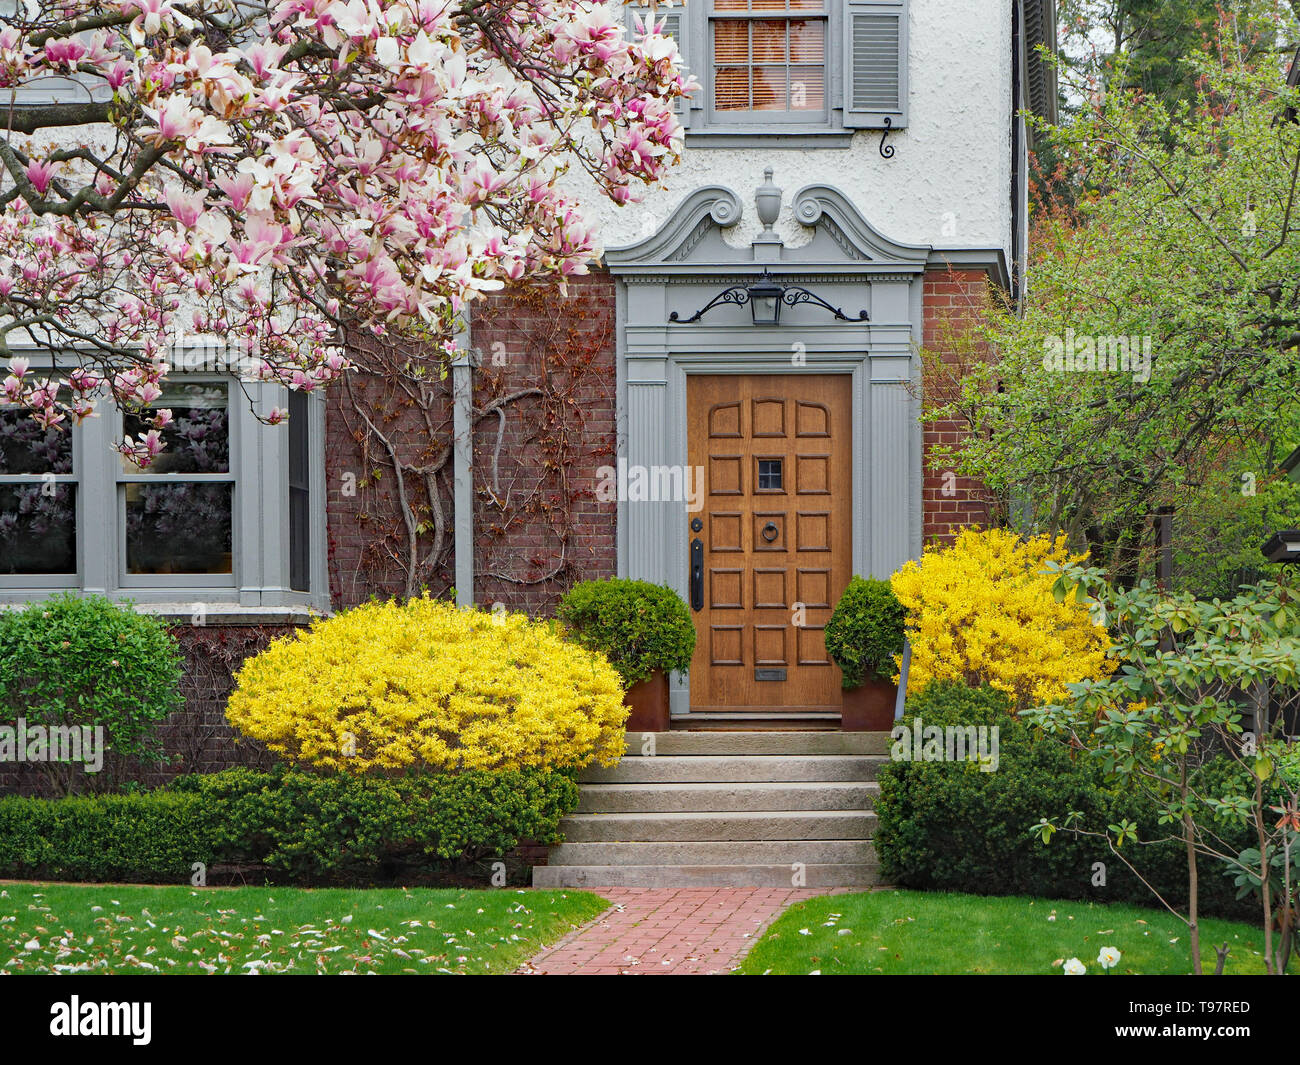 Elegant wooden front door of house with magnolia tree and forsythia bushes in bloom Stock Photo